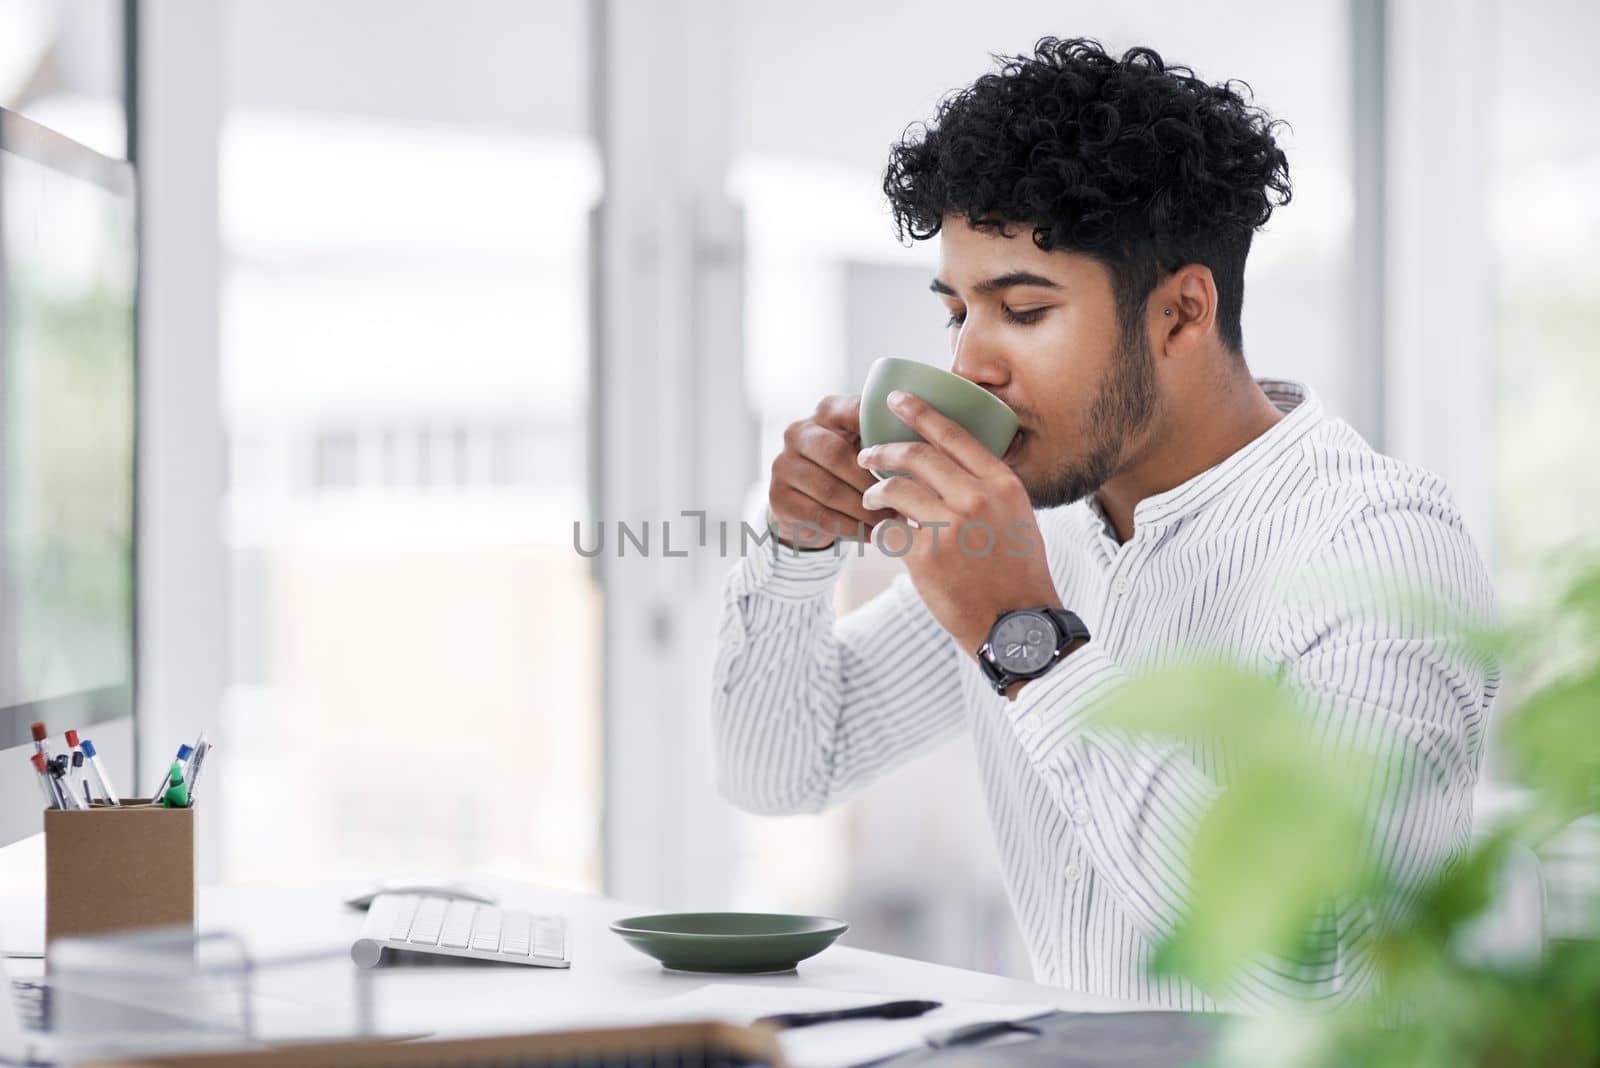 I can achieve it all with coffee by my side. Portrait of a young businessman drinking coffee while working in an office